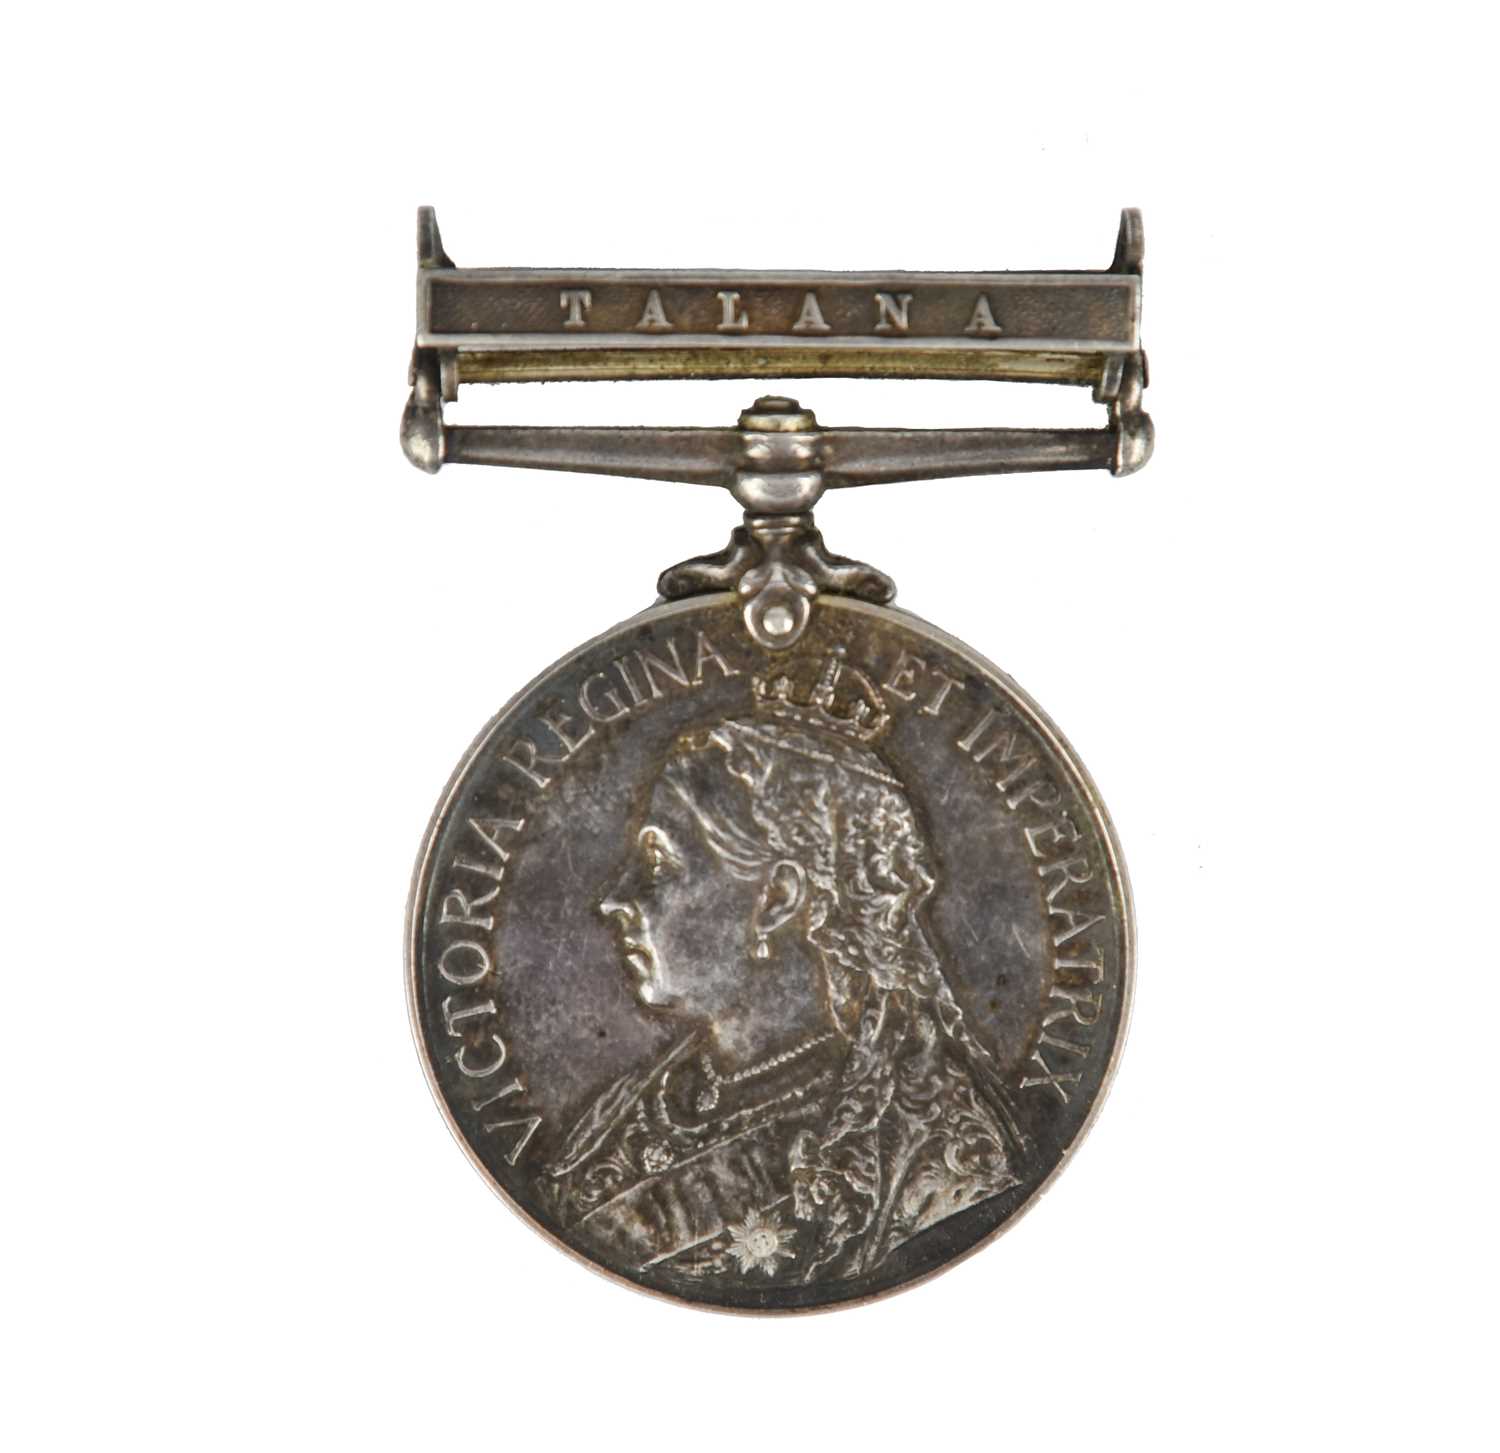 A Queen's South Africa Medal to Major Charles Archibald Townshend Boultbee, King's Royal Rifle